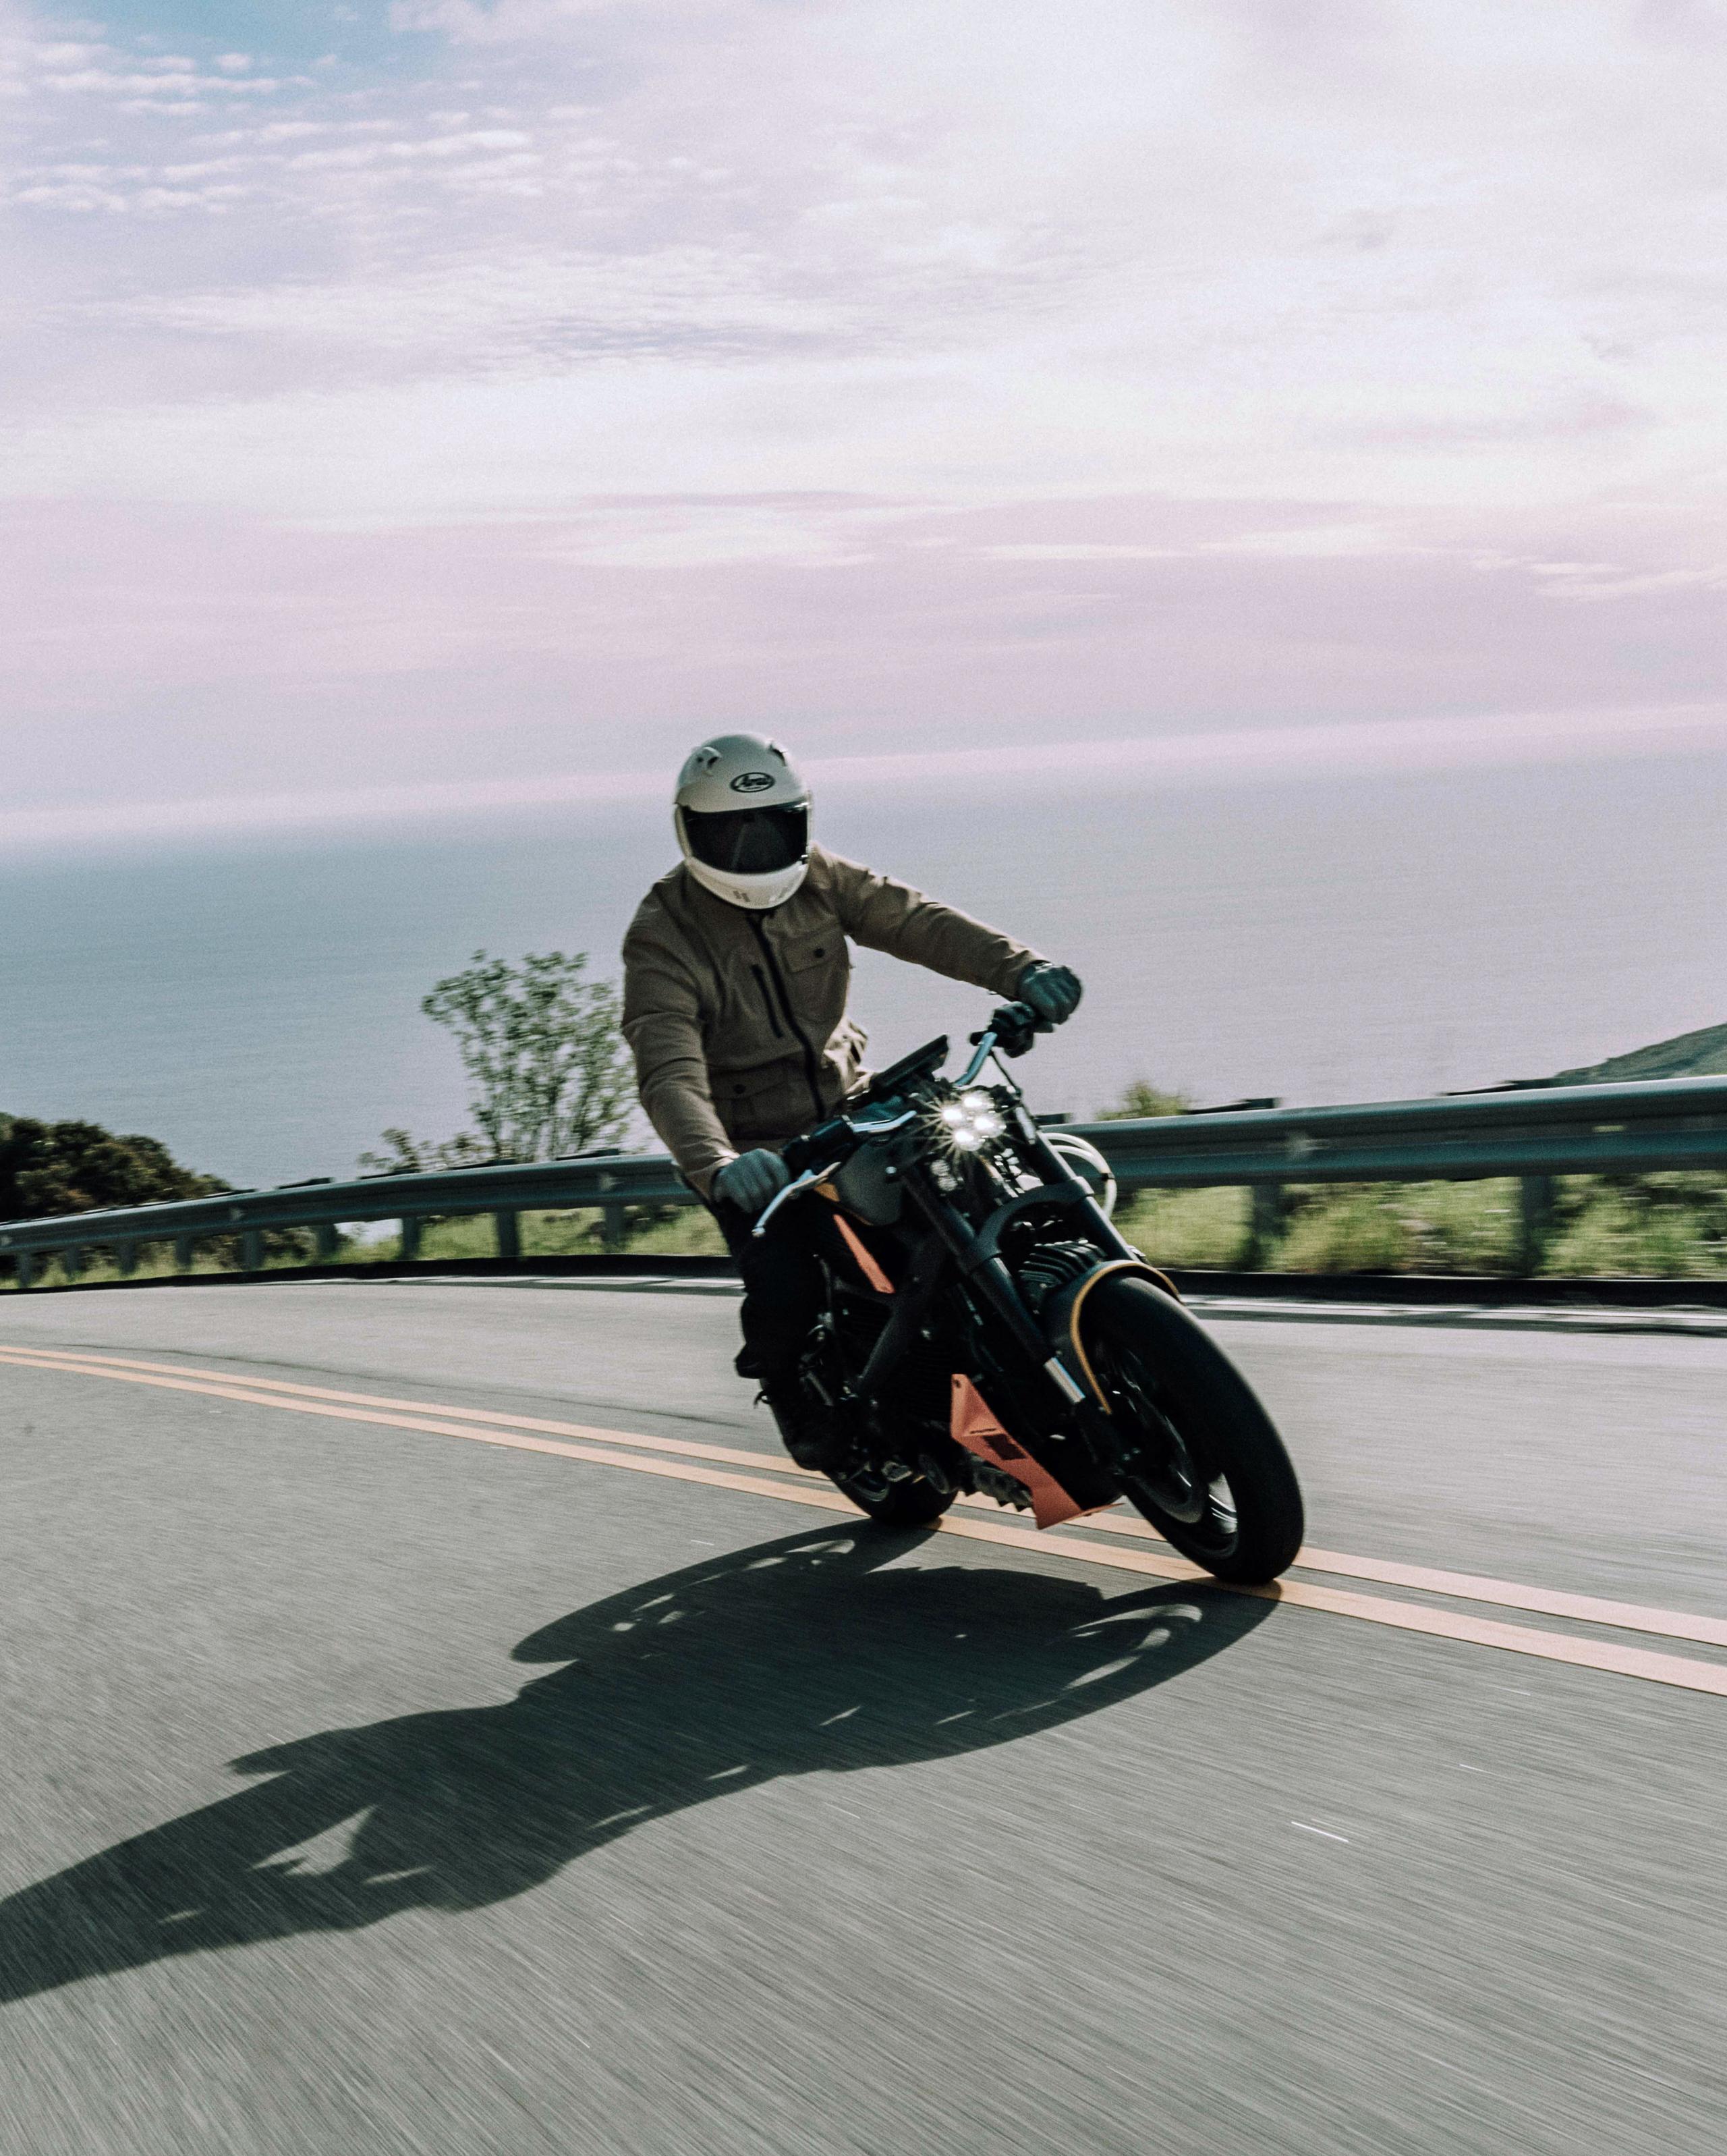 Motorcyclist in Mulholland riding up Malibu hills with Pacific Ocean in the background